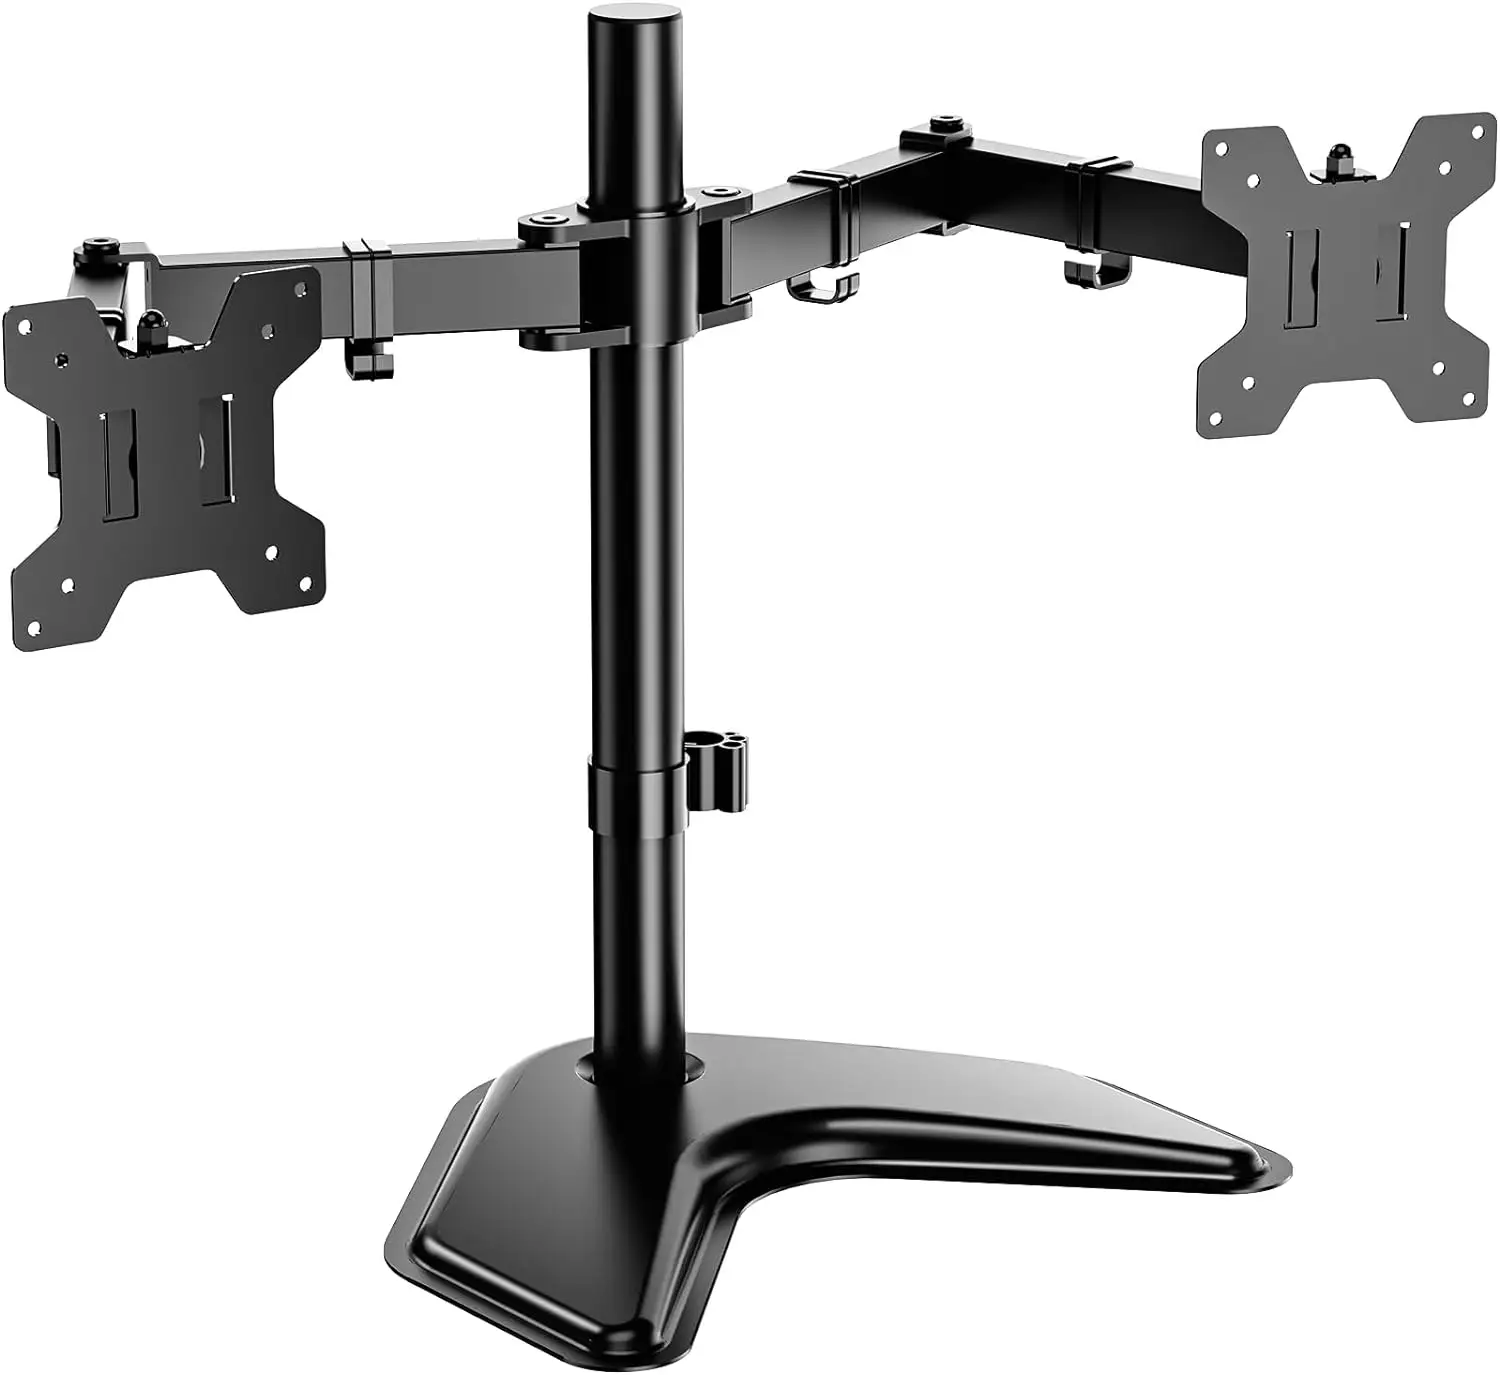 Heavy Duty Dual Monitor Stand Holds up to 22 lbs Dual Monitor Arm with Height Adjustable Tilt Rotate